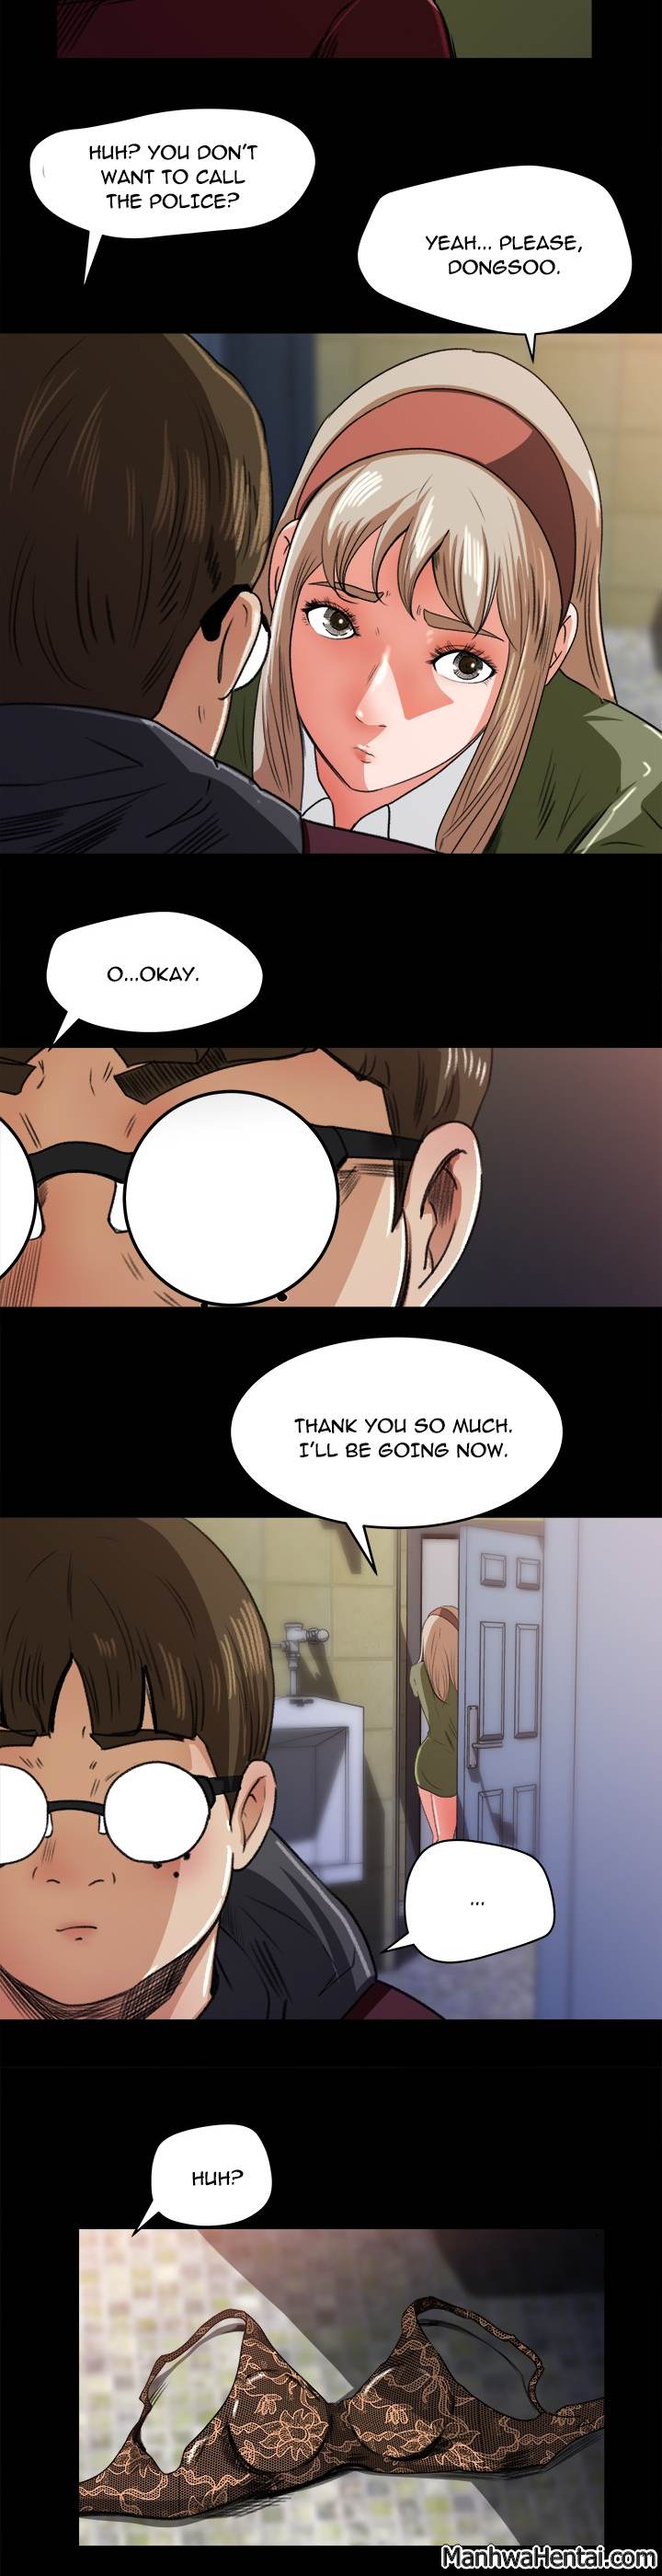 Inside the Uniform Chapter 5 - Page 25